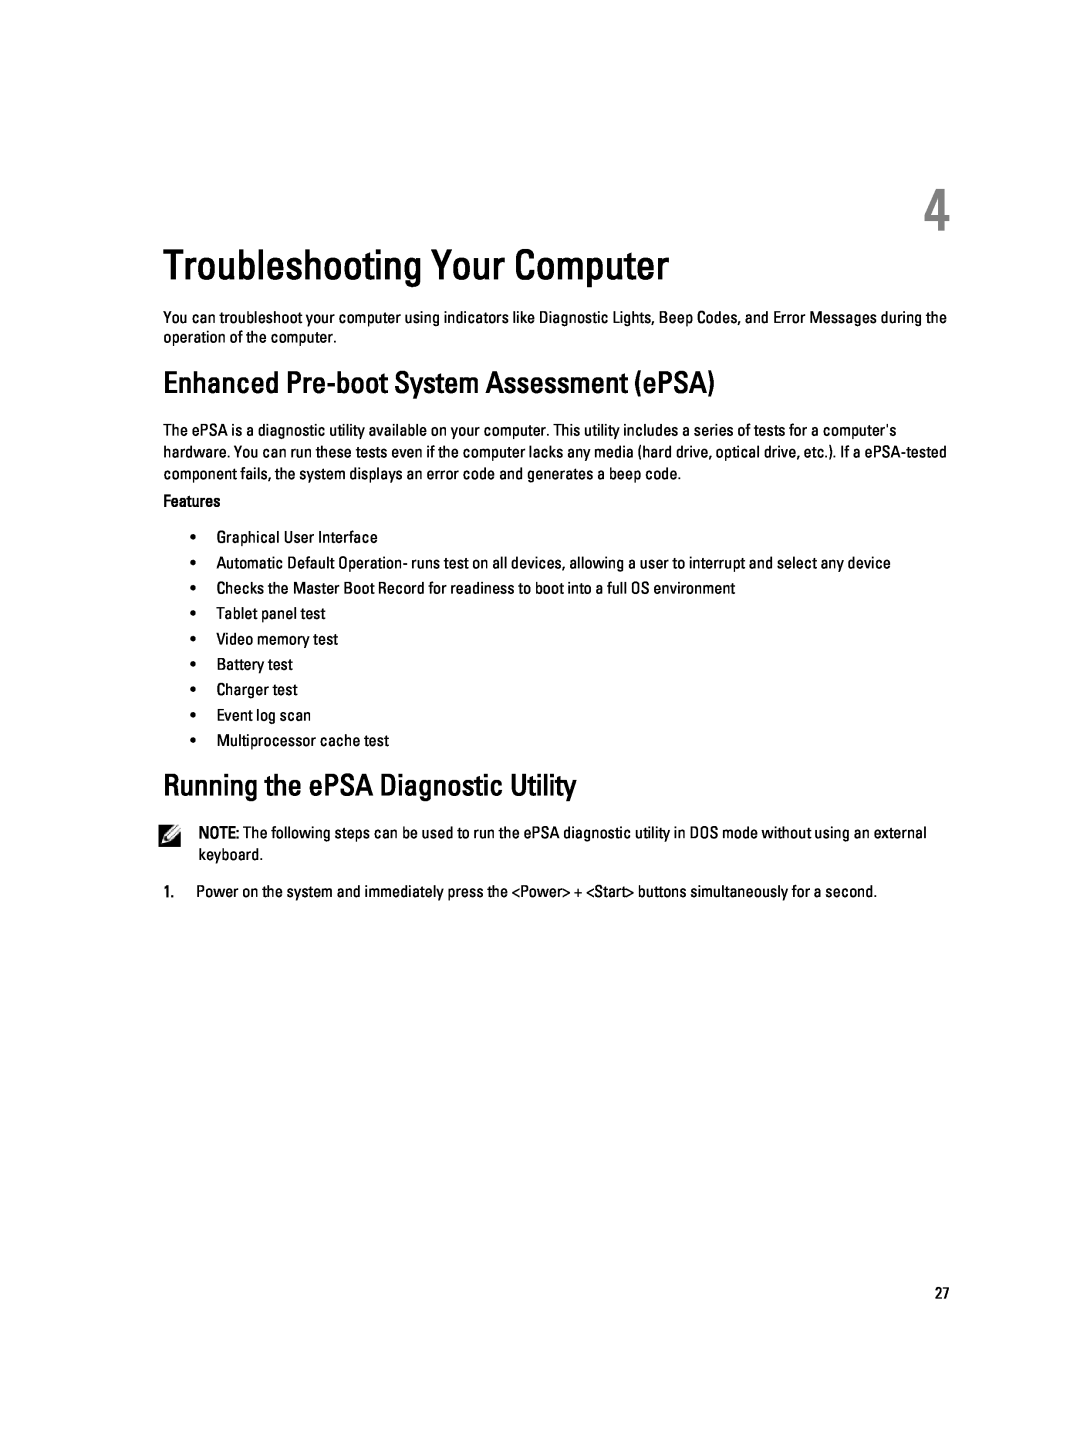 Dell 10-ST2E Troubleshooting Your Computer, Enhanced Pre-boot System Assessment ePSA, Running the ePSA Diagnostic Utility 